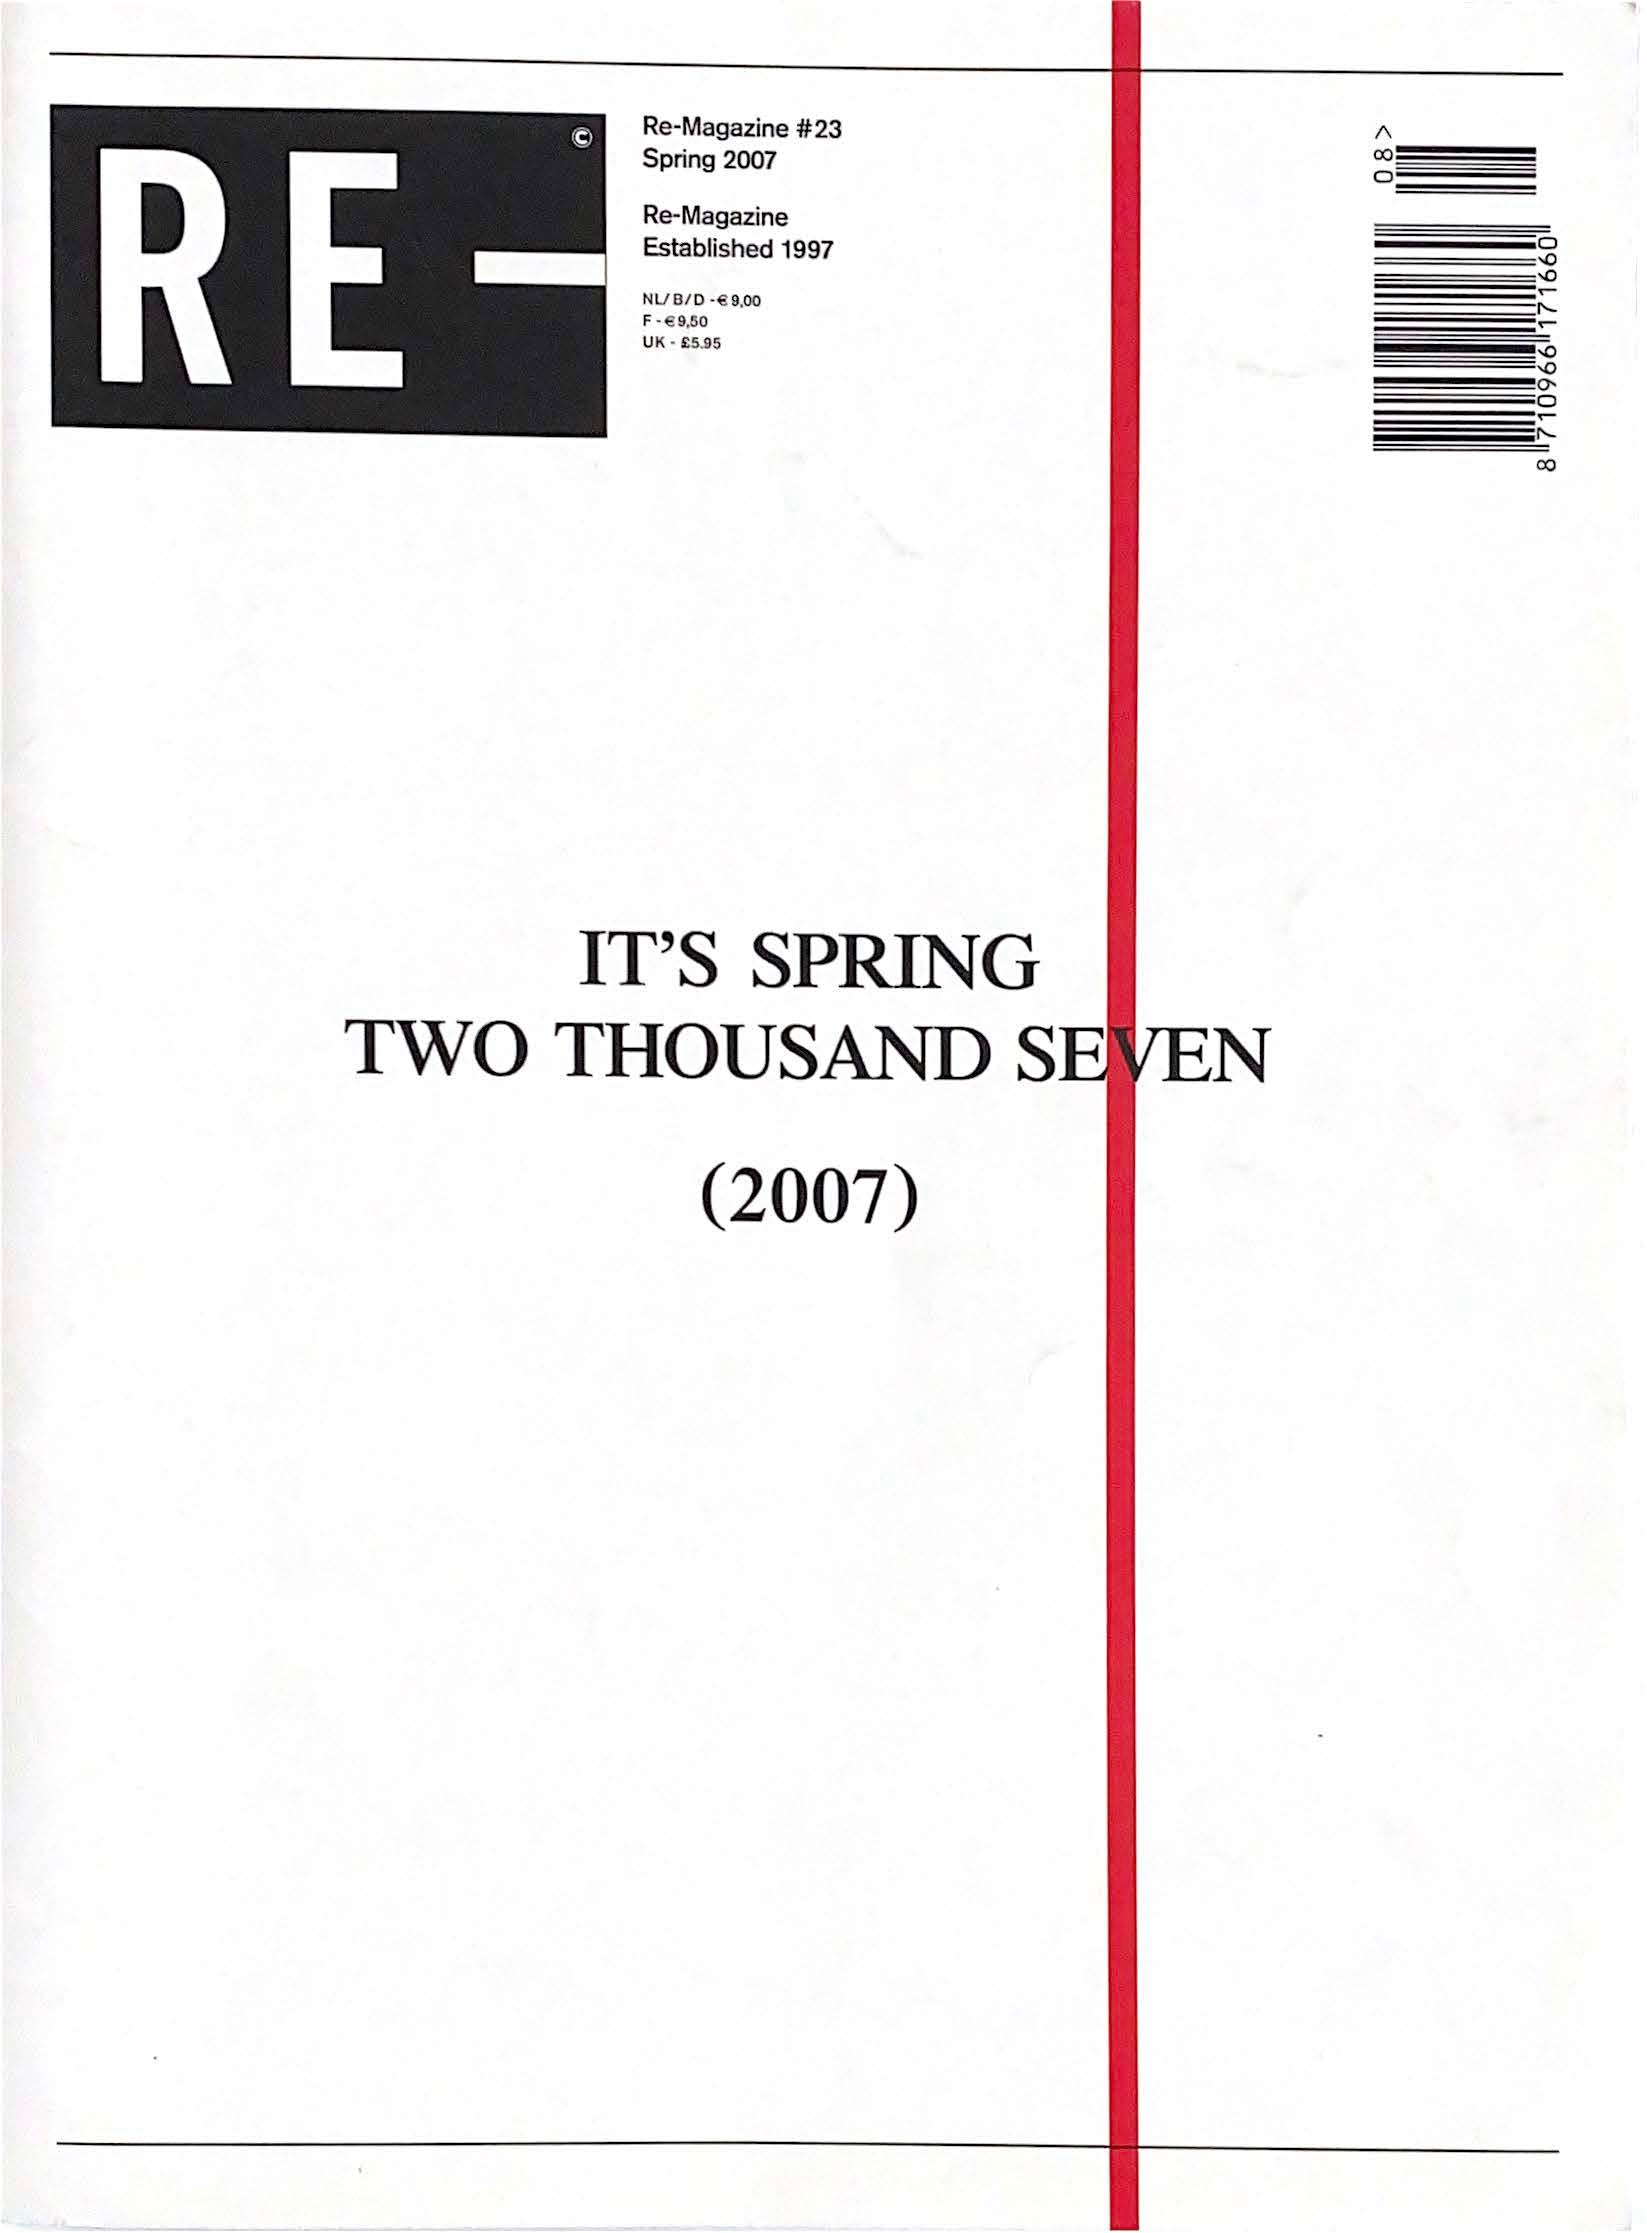 RE-Magazine #23: It’s Spring Two Thousand Seven